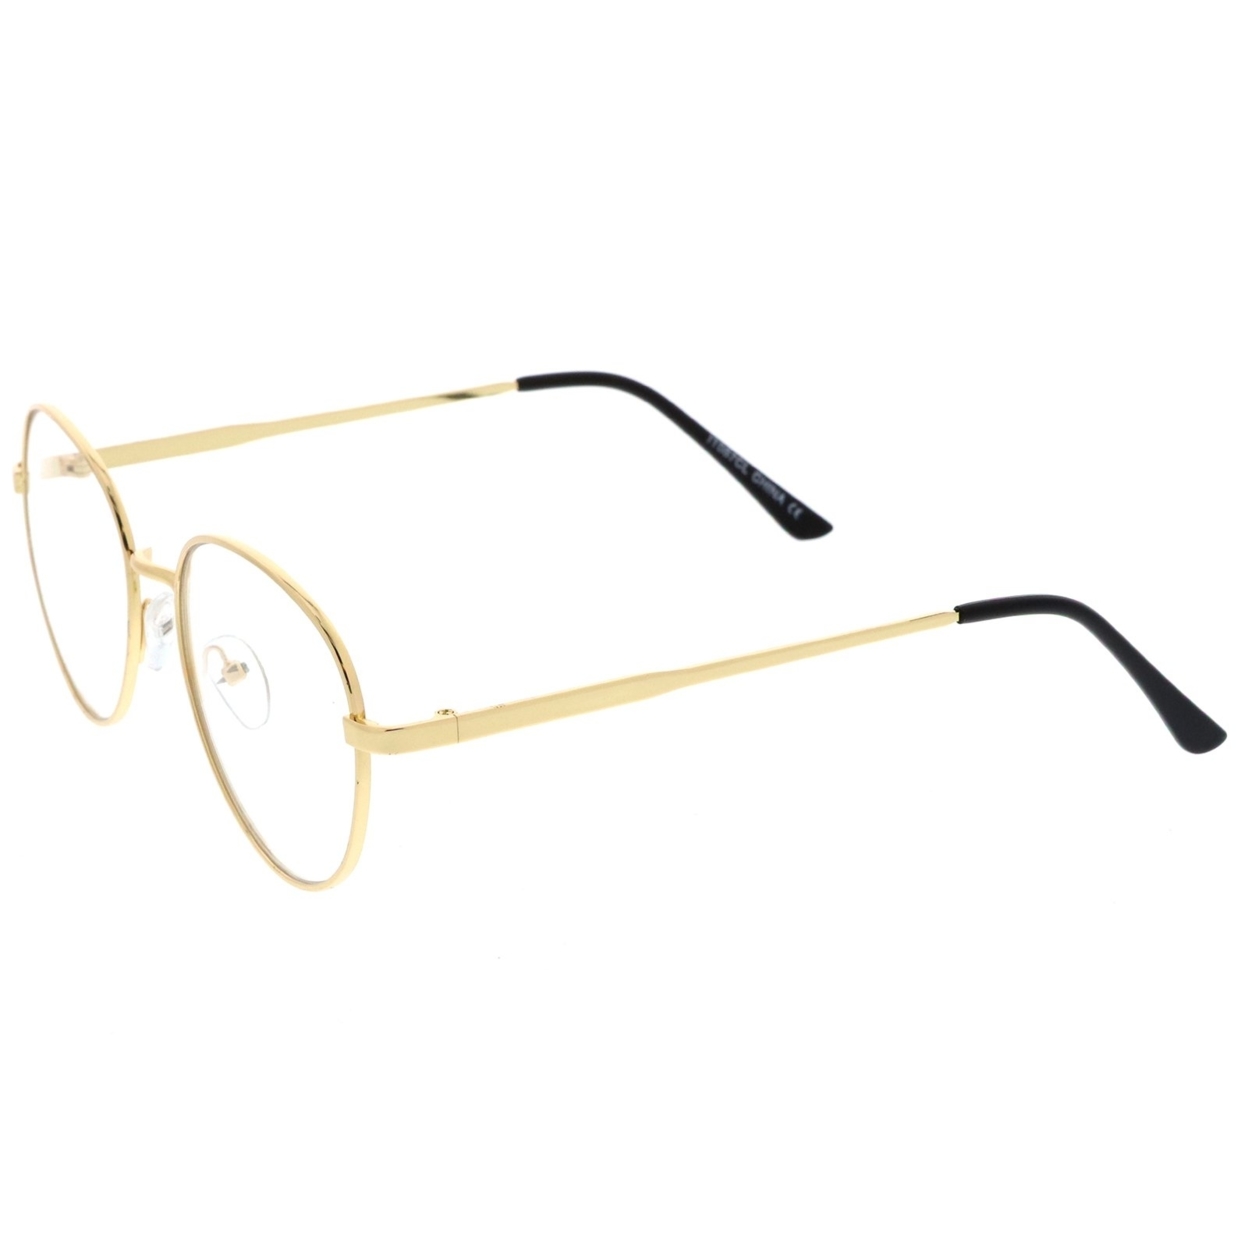 Classic Metal Frame Slim Temple Clear Lens Round Eyeglasses 53mm - Gold / Clear